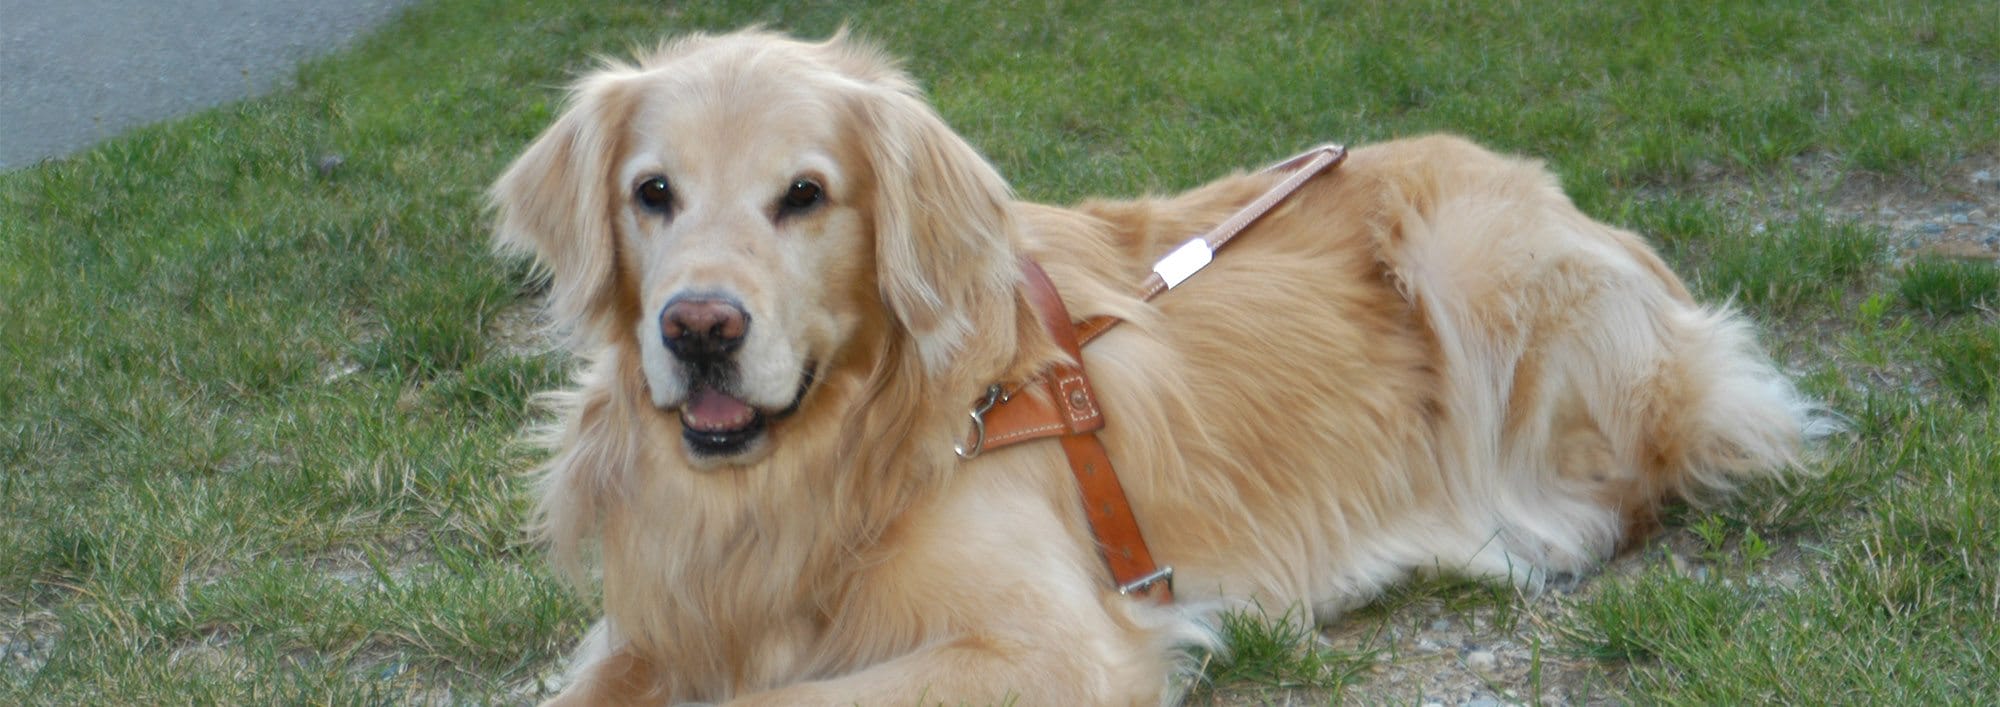 A golden retriever that has white fur on its face, showing its age, lies on grass while wearing a Leader Dog harness